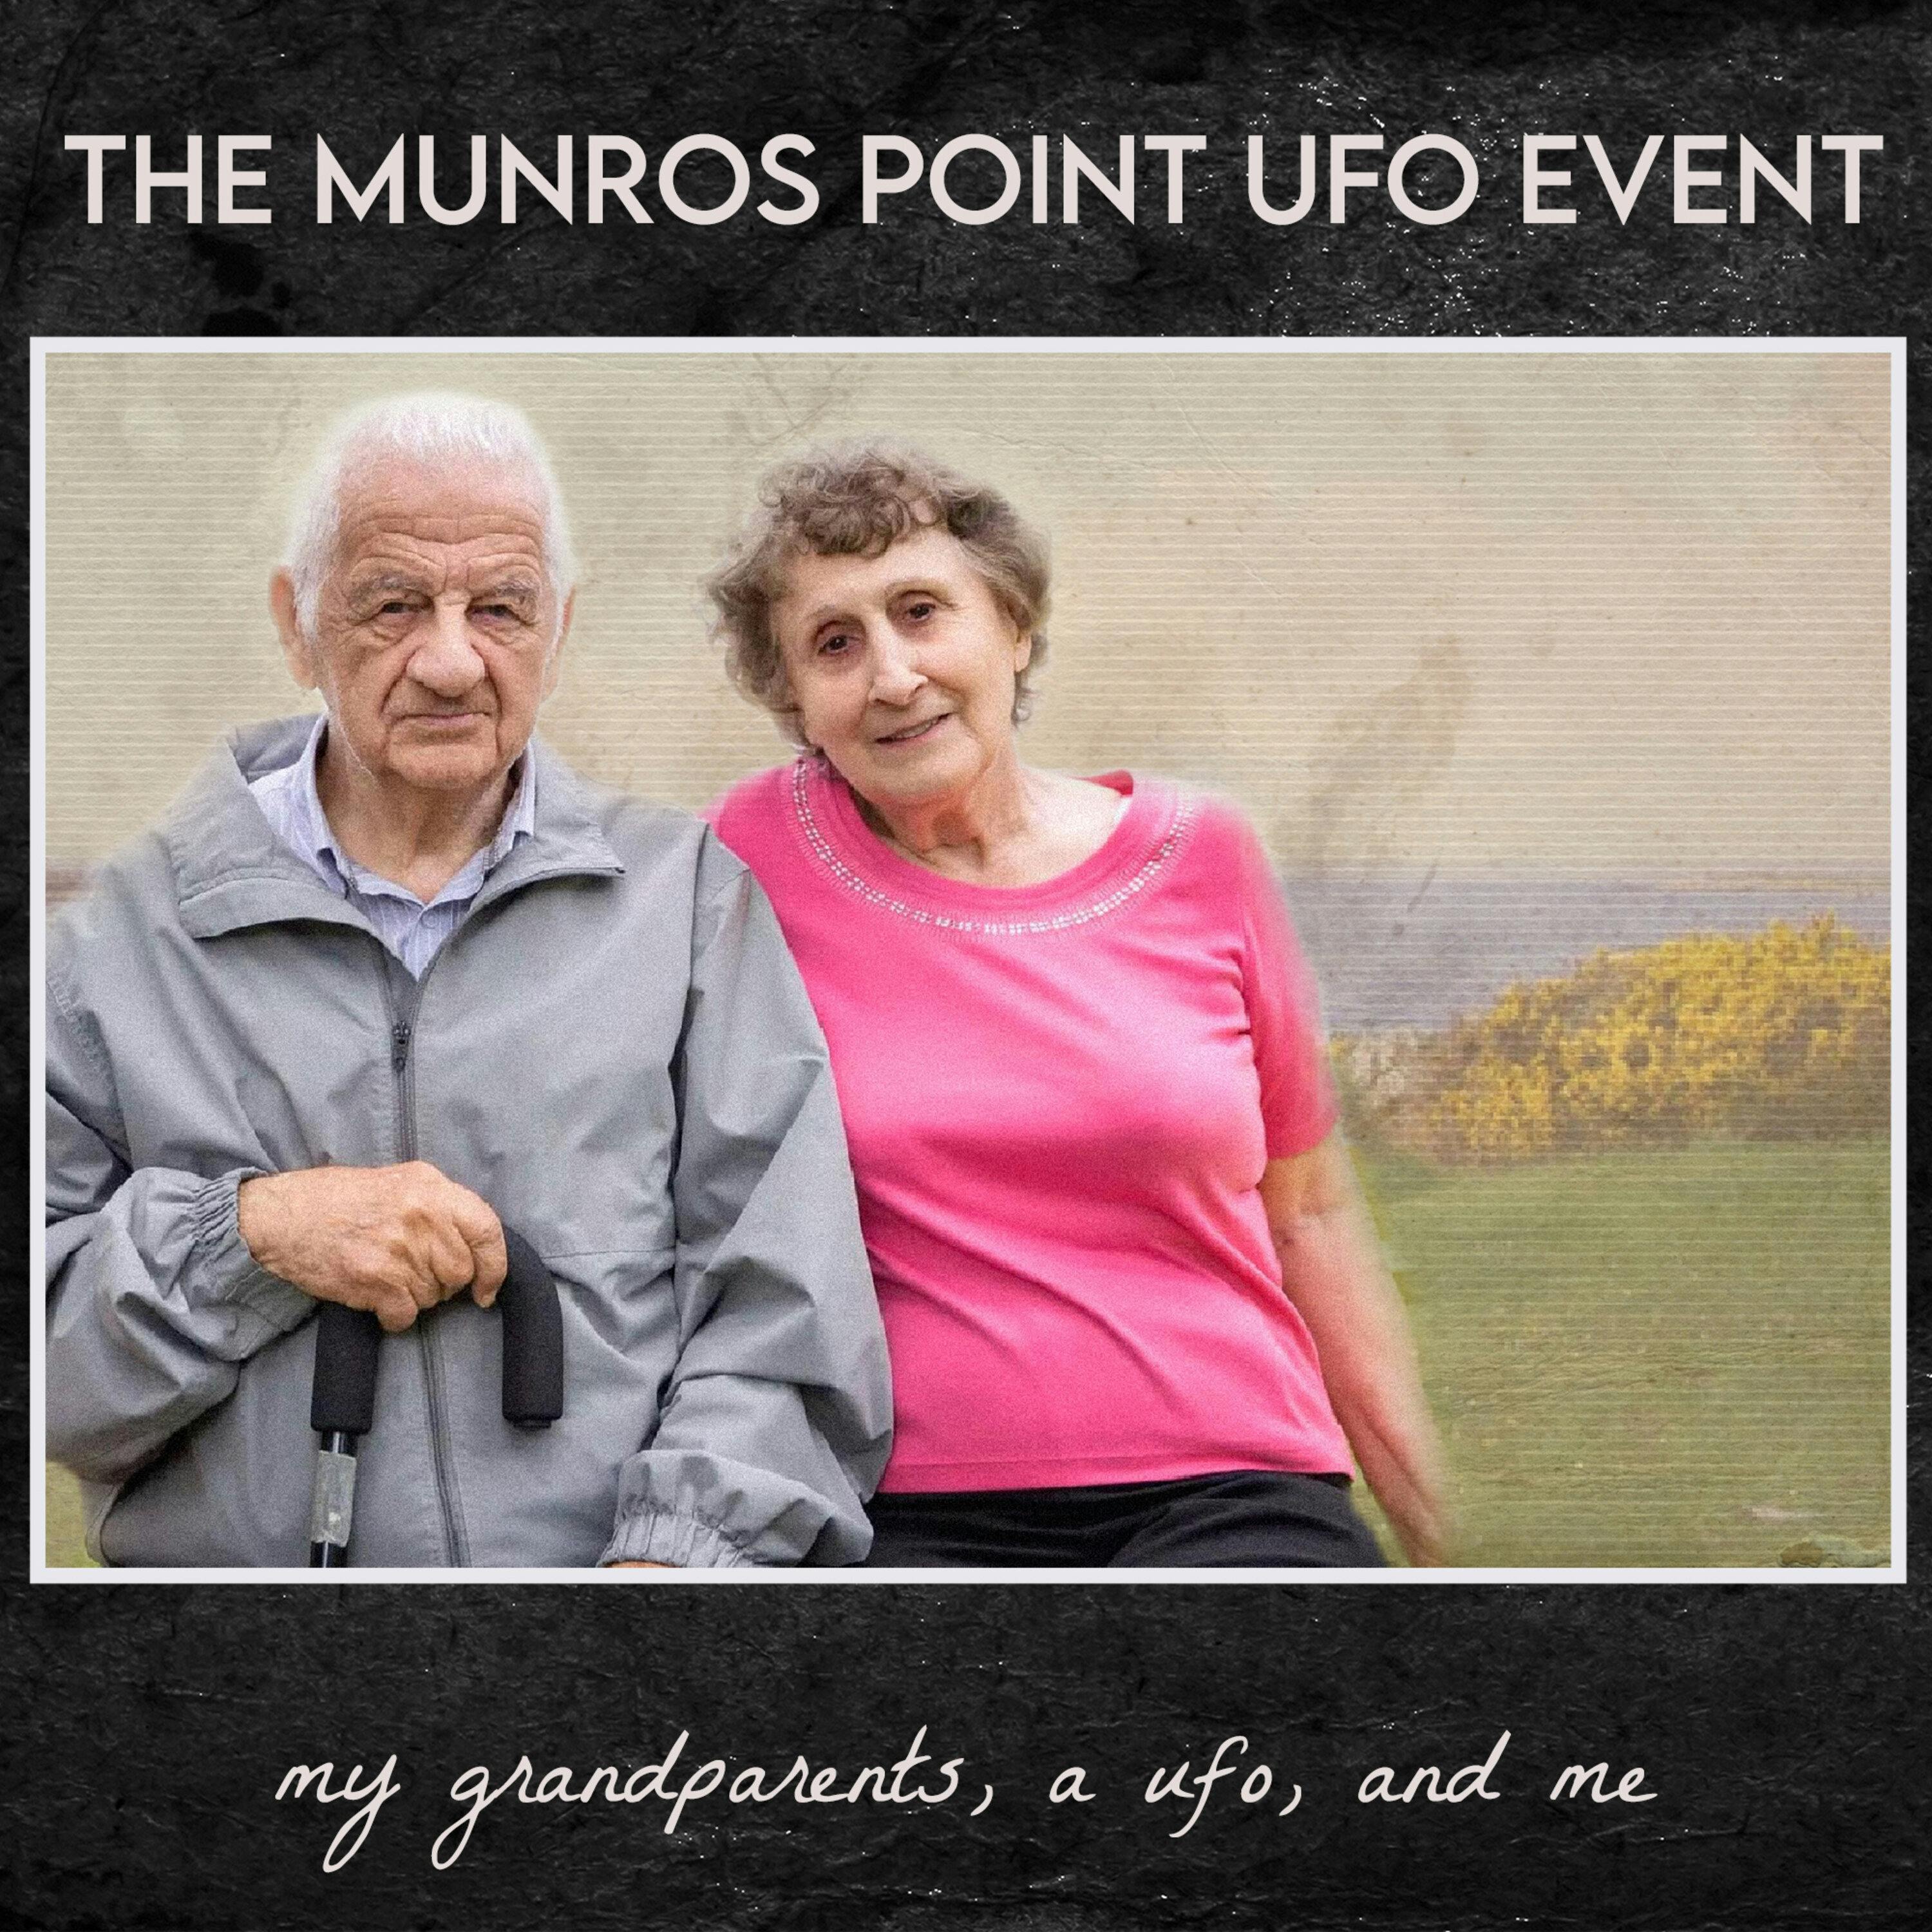 the Munros Point UFO Event (my grandparents, a ufo, and me)